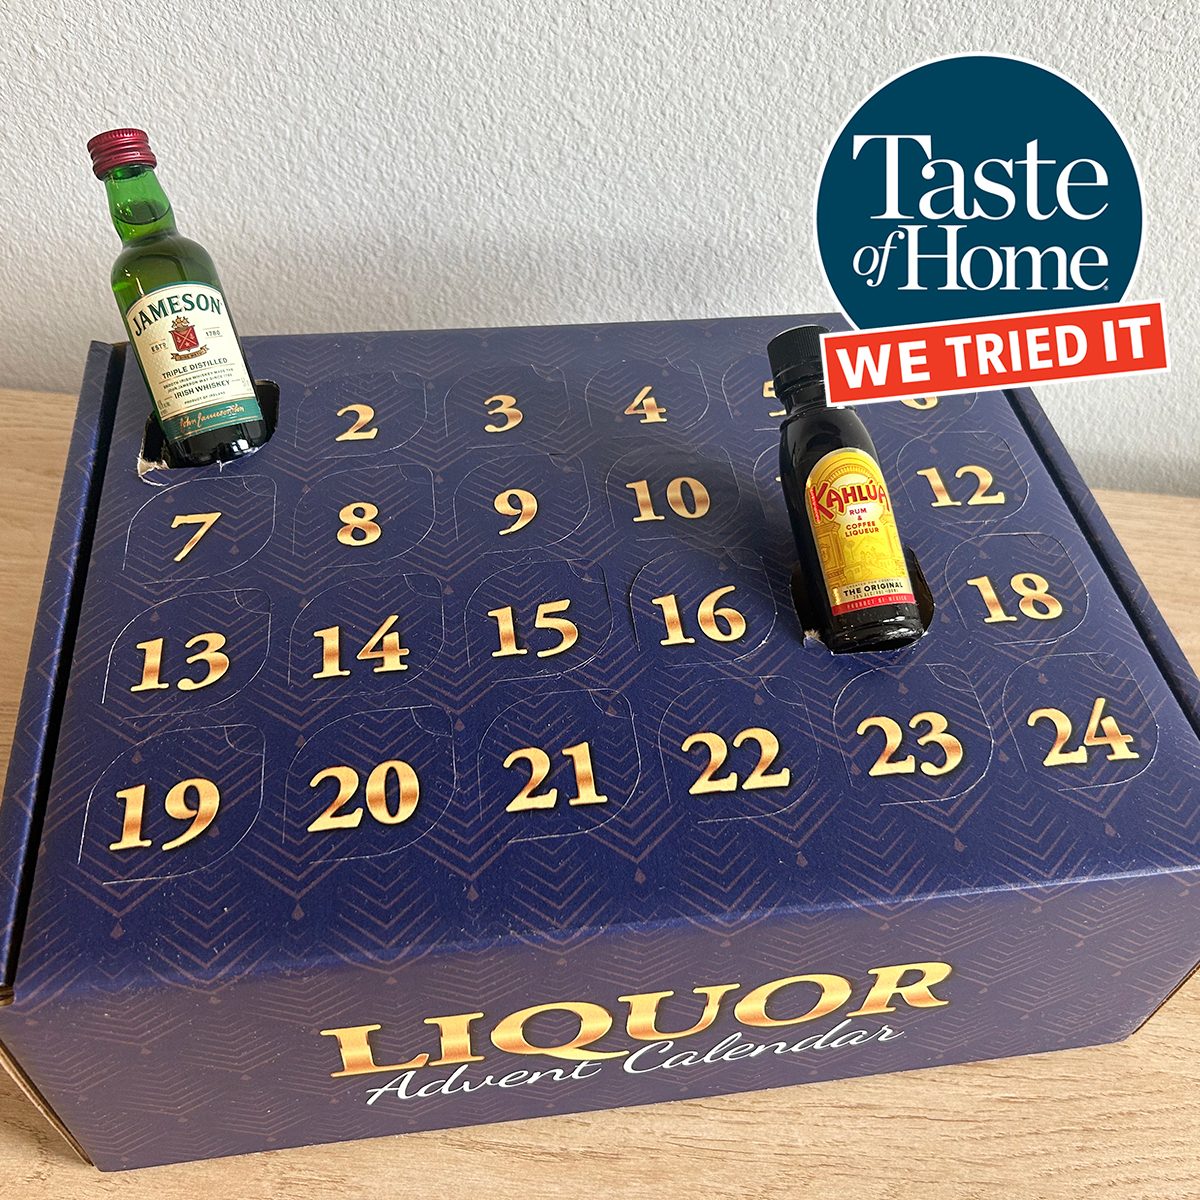 The 9 Best Whiskey Advent Calendars